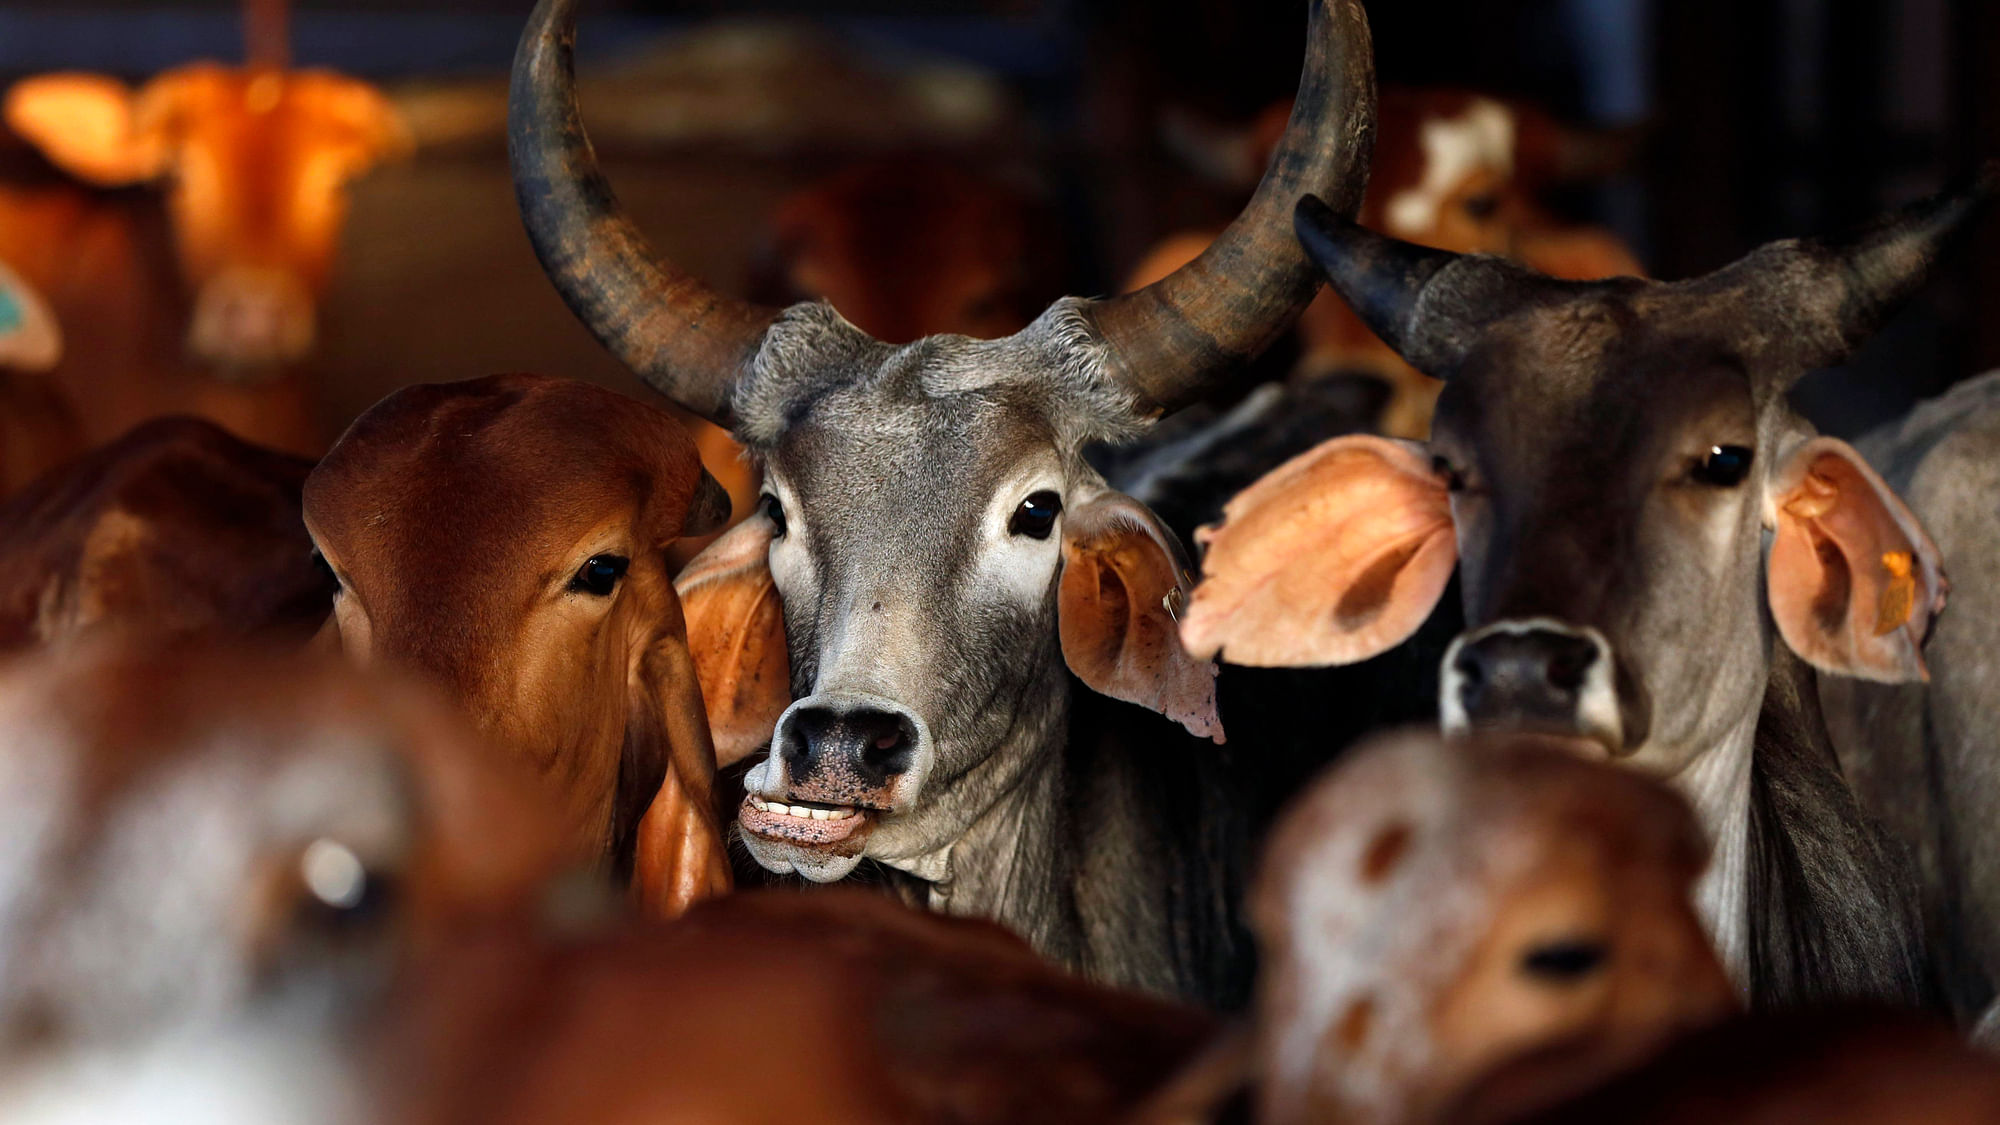 BJP leaders in Meghalaya, Manipur, and Nagaland have assured people that no beef ban will take place. (Photo: Reuters)